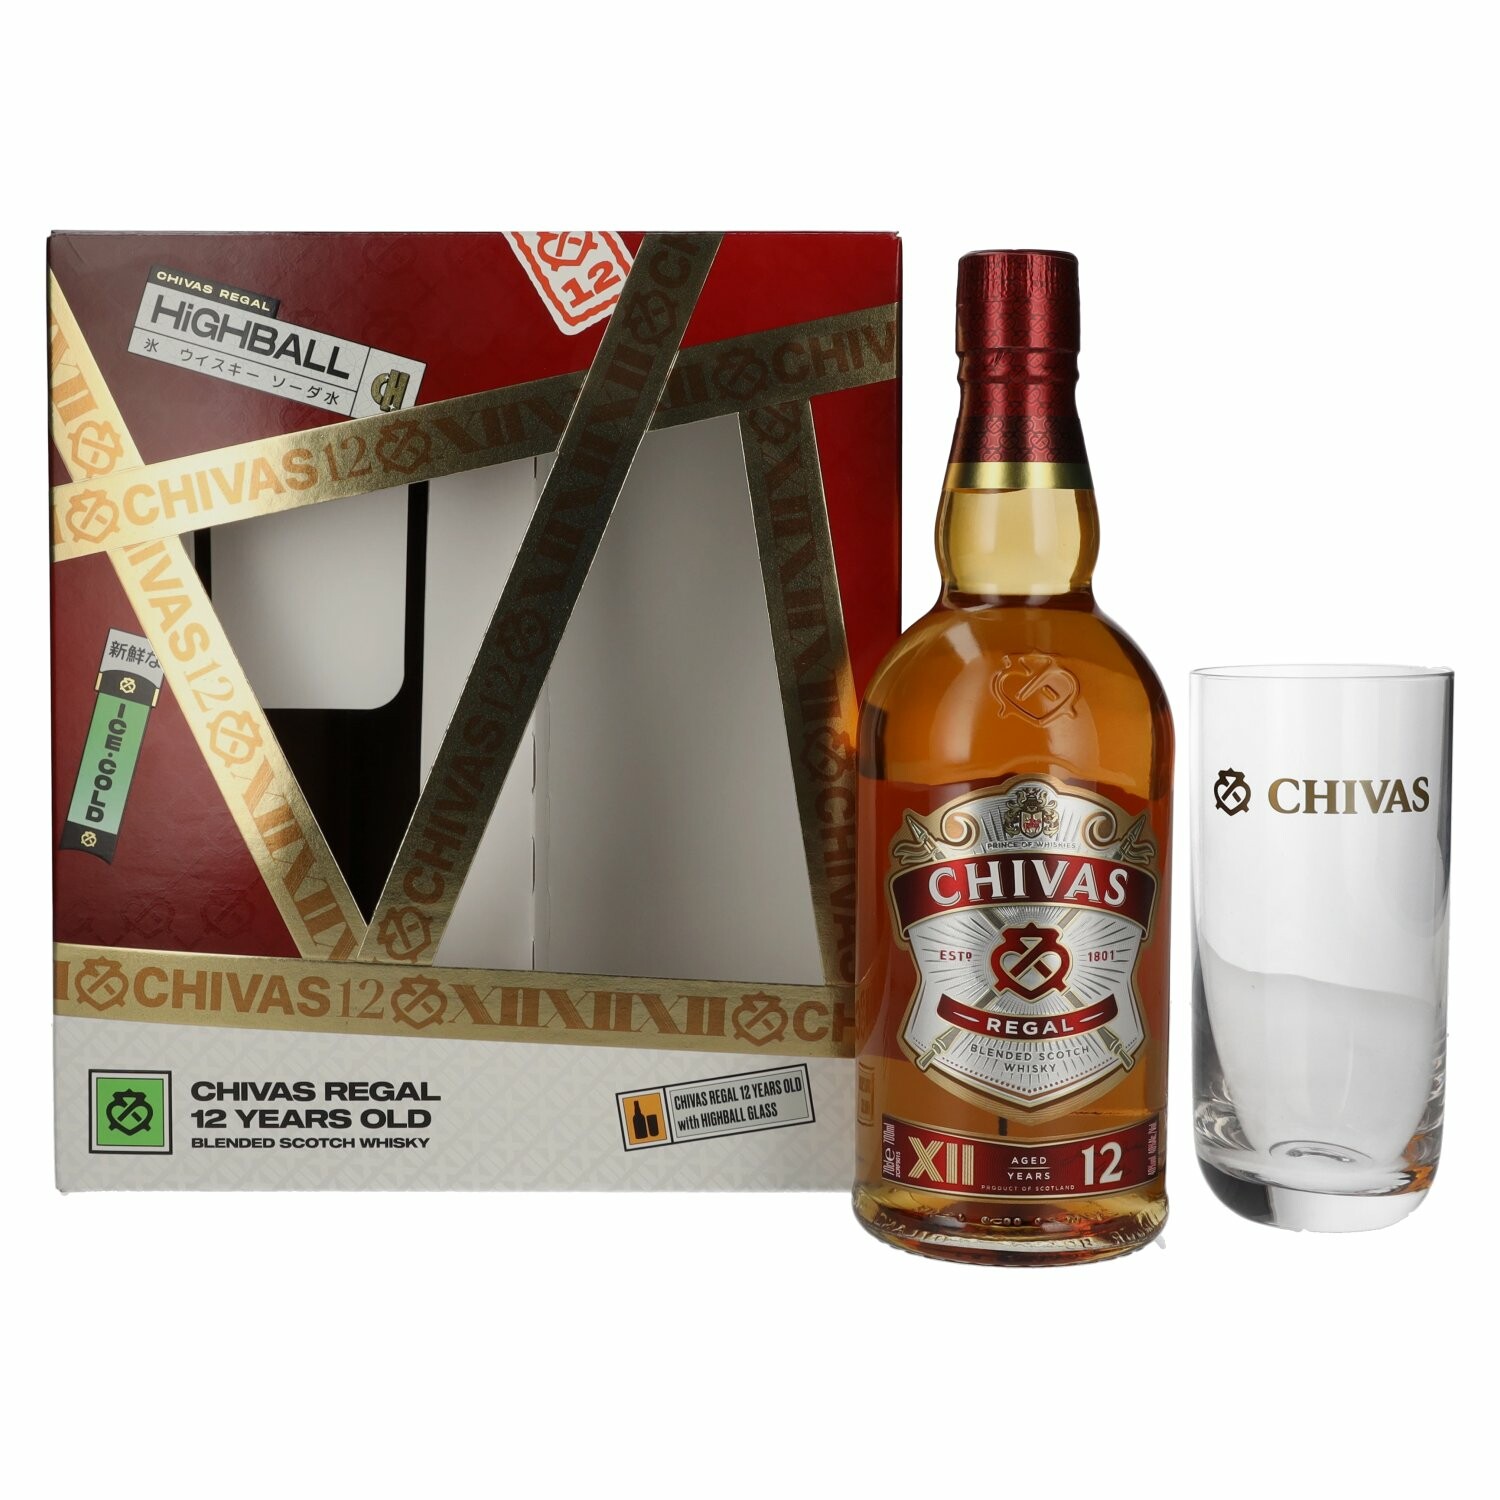 Chivas Regal 12 Years Old Blended Scotch Whisky 40% Vol. 0,7l in Giftbox with glass